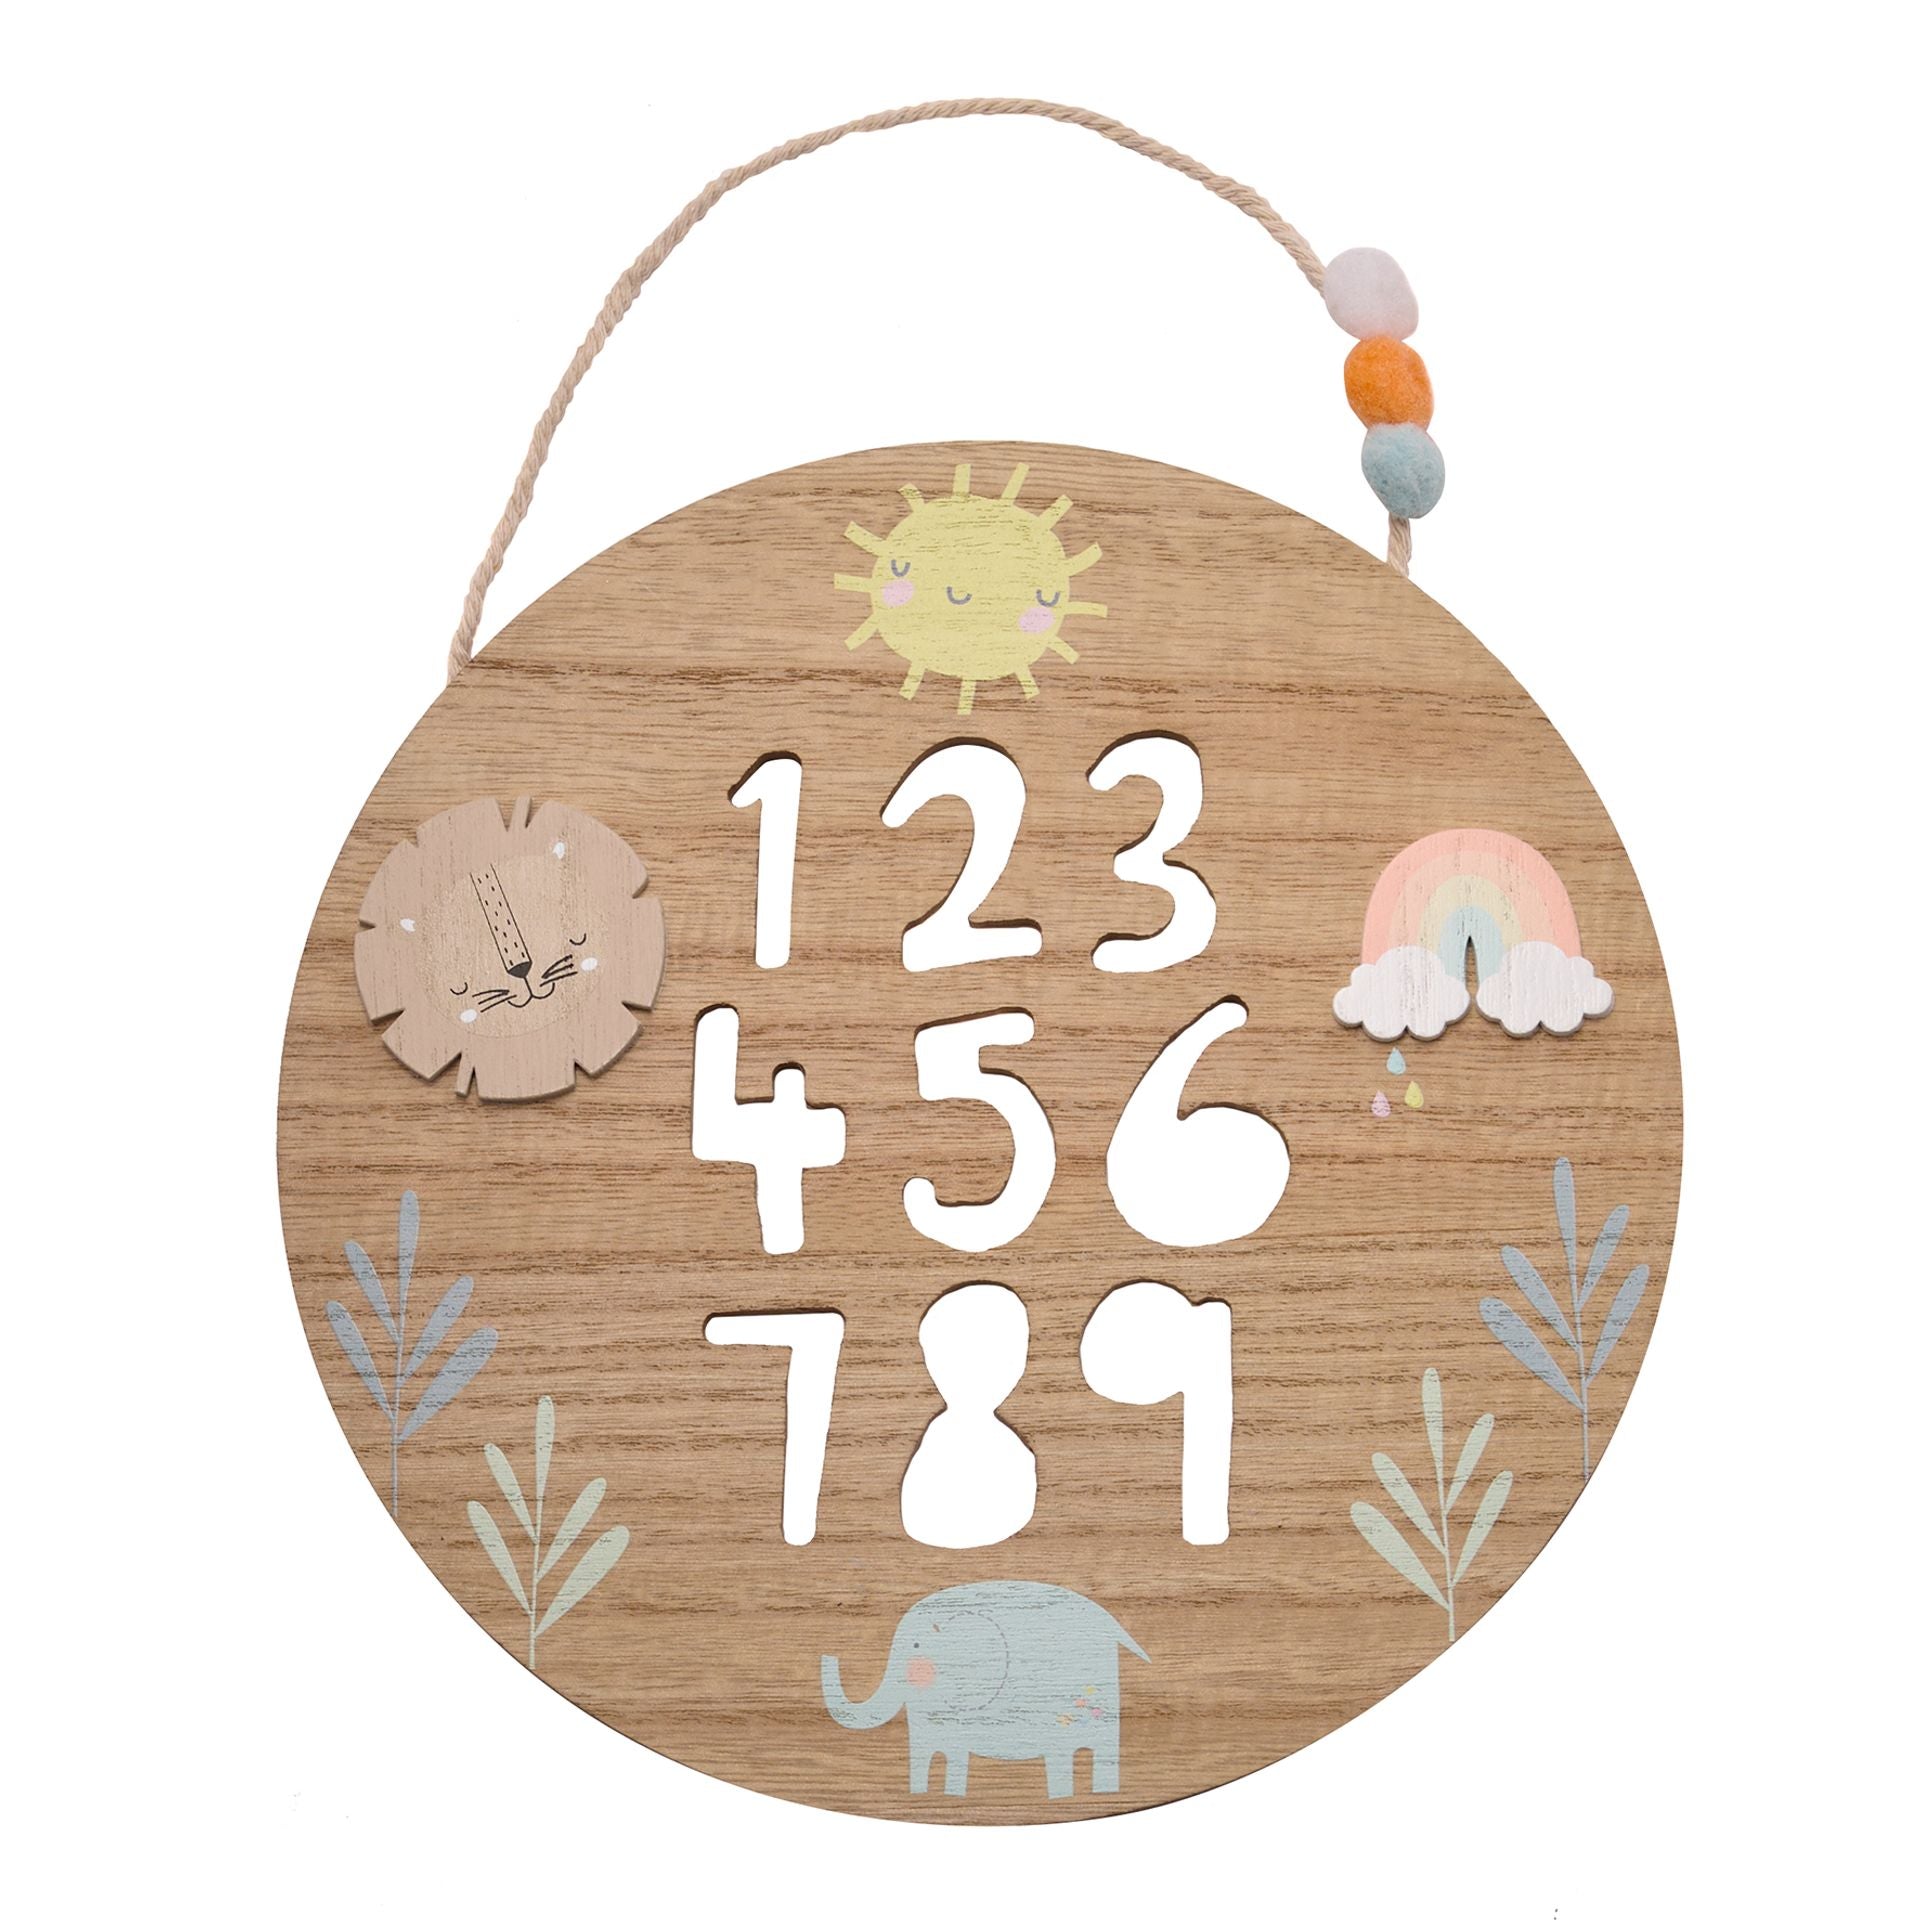  Wooden Plaque features a colourful die cut design and is designed for wall hanging using the attached pom pom rope hanger. 